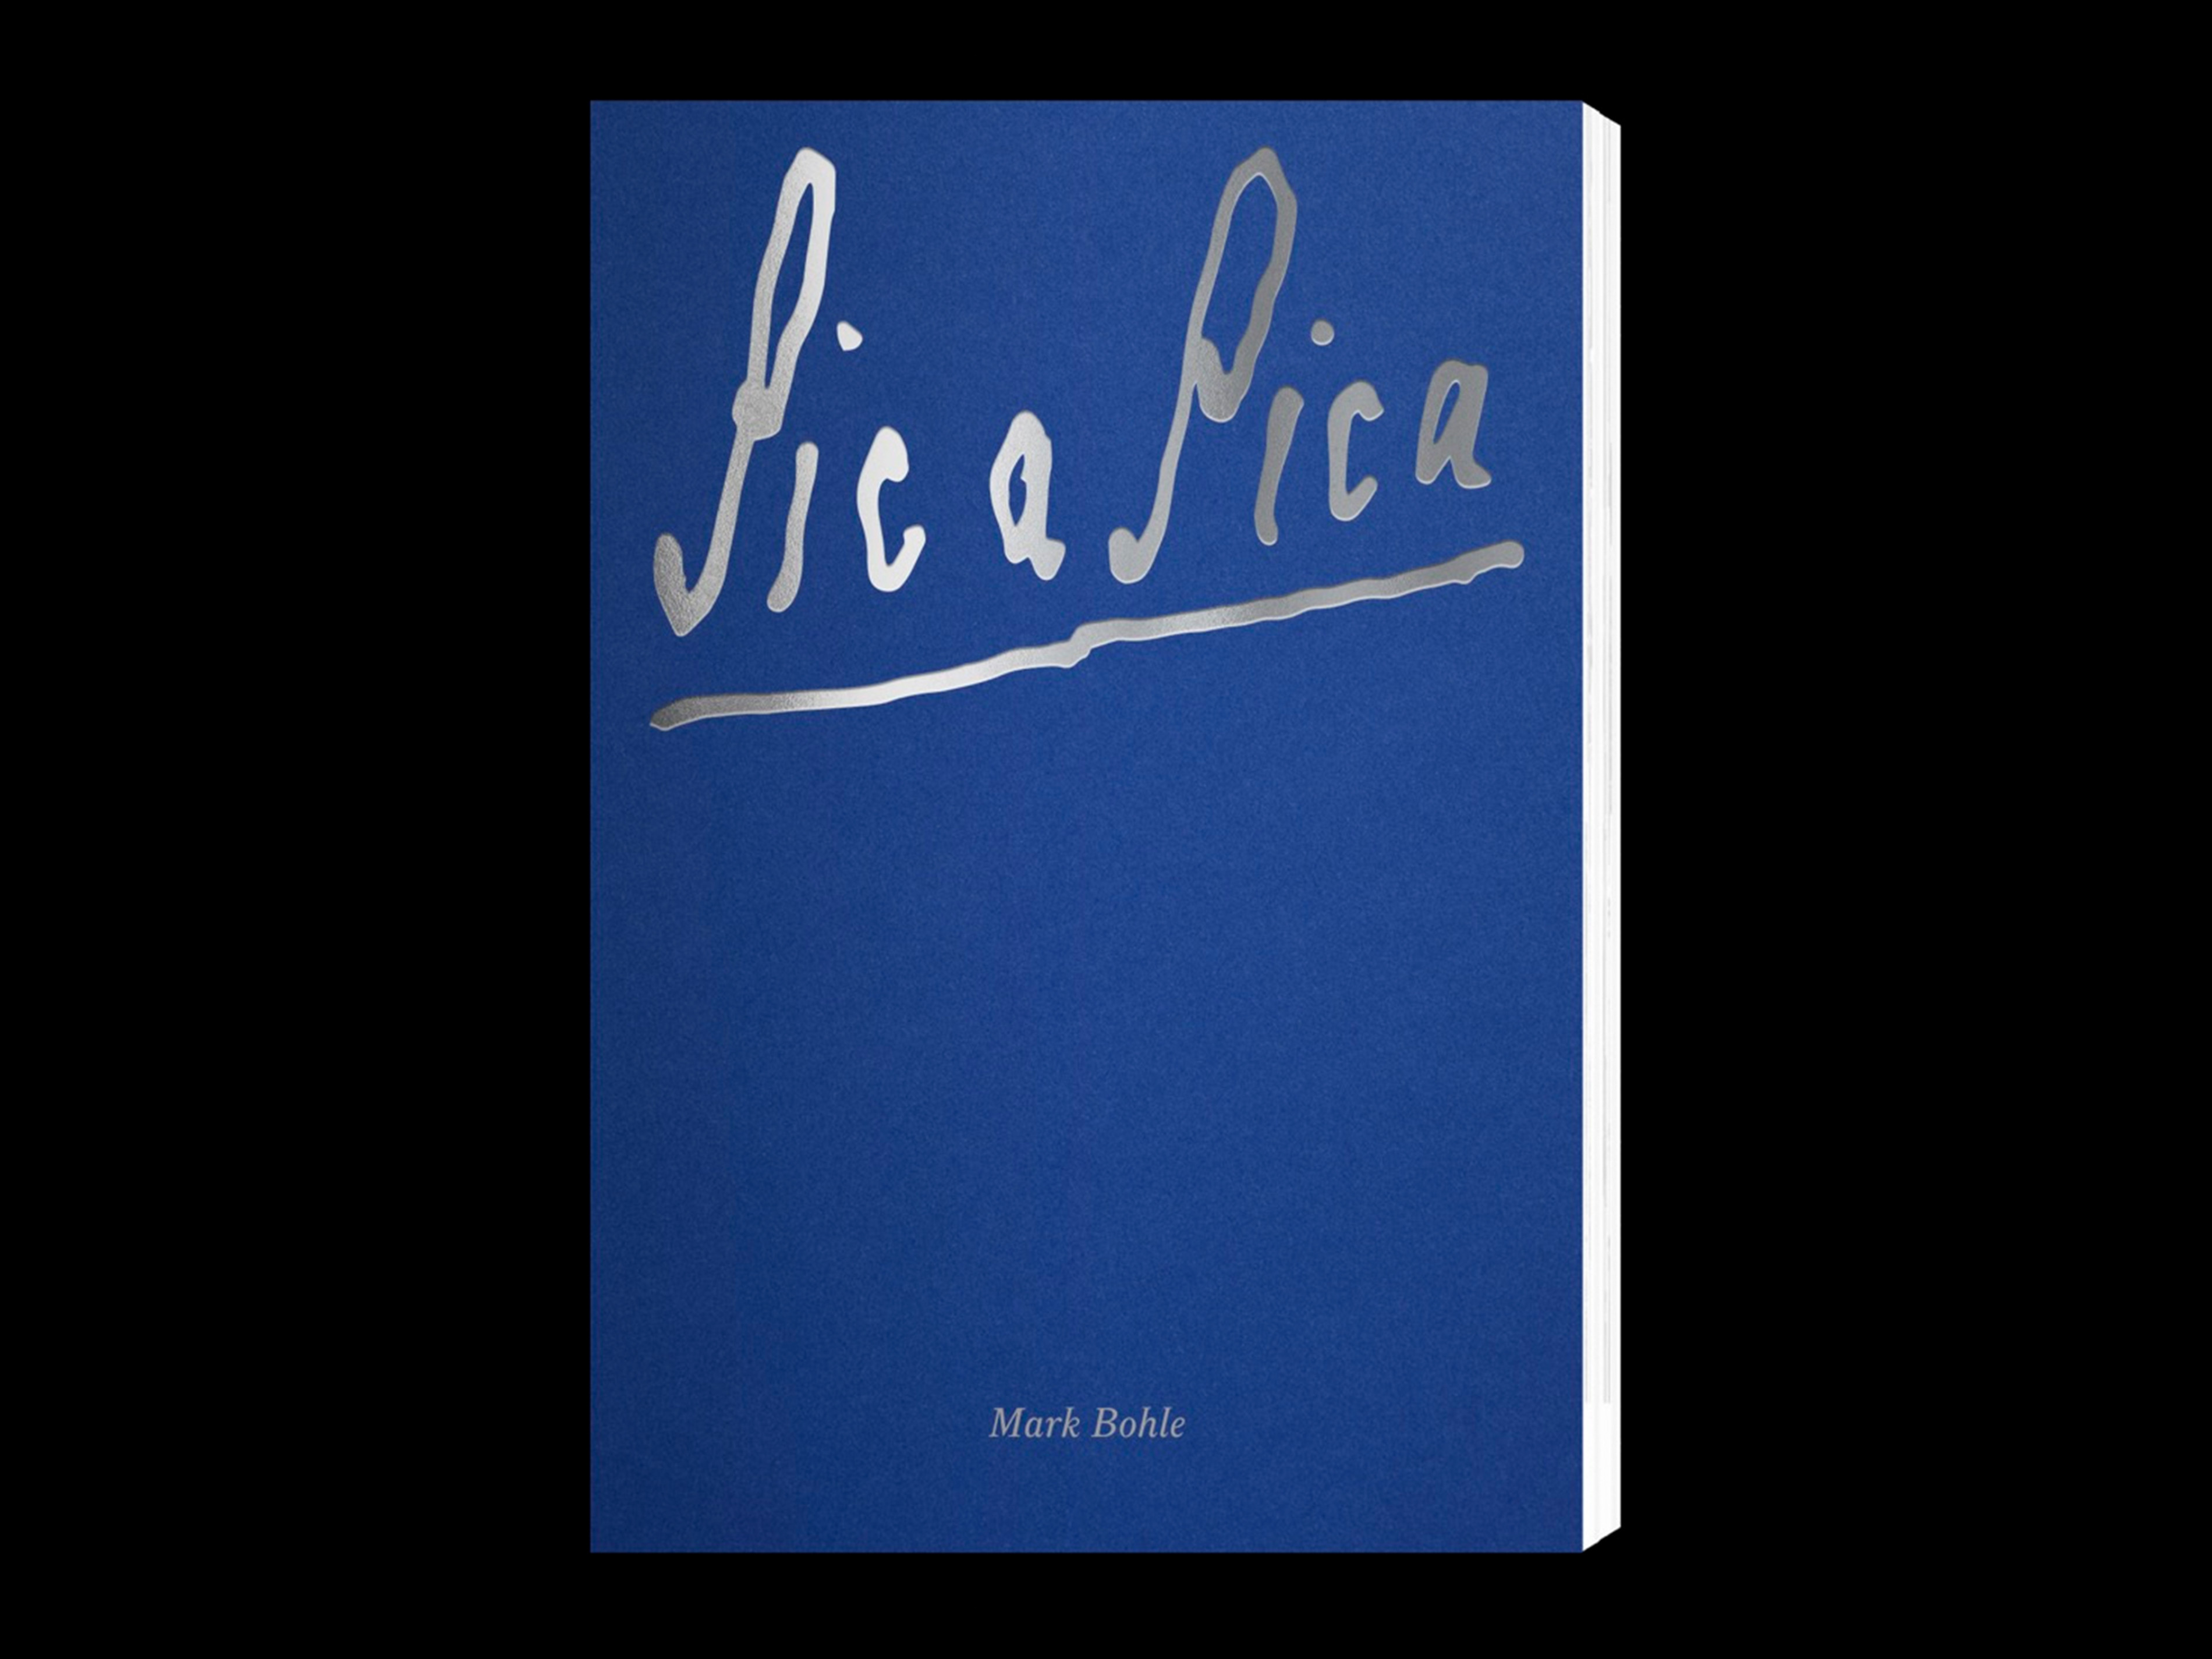 Cover of the book with a hand drawn silver title on blue background